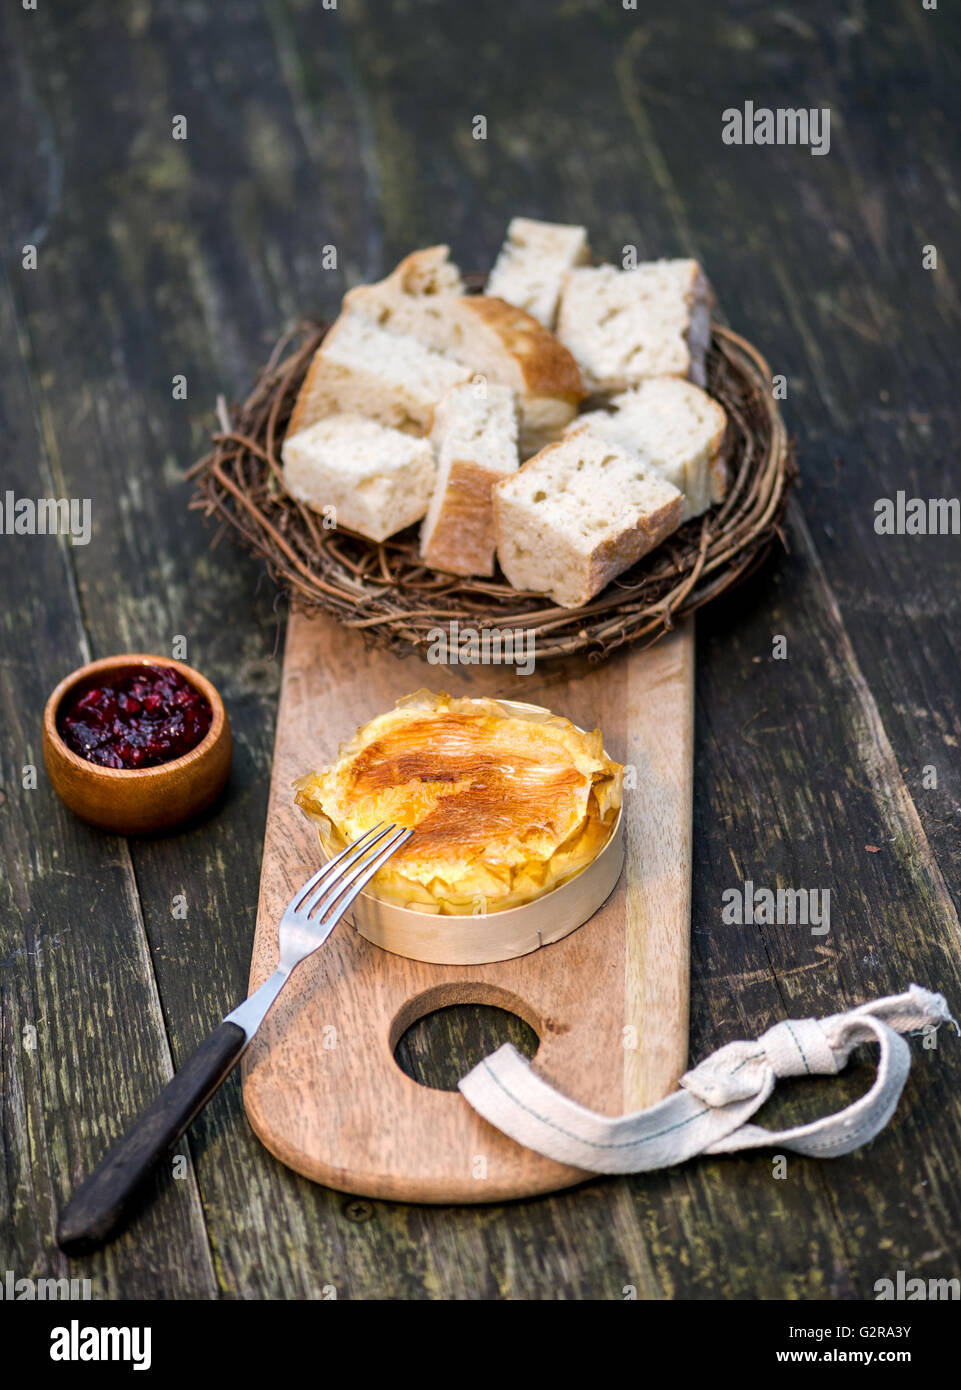 Camembert, served with a bread basket and cranberries Stock Photo